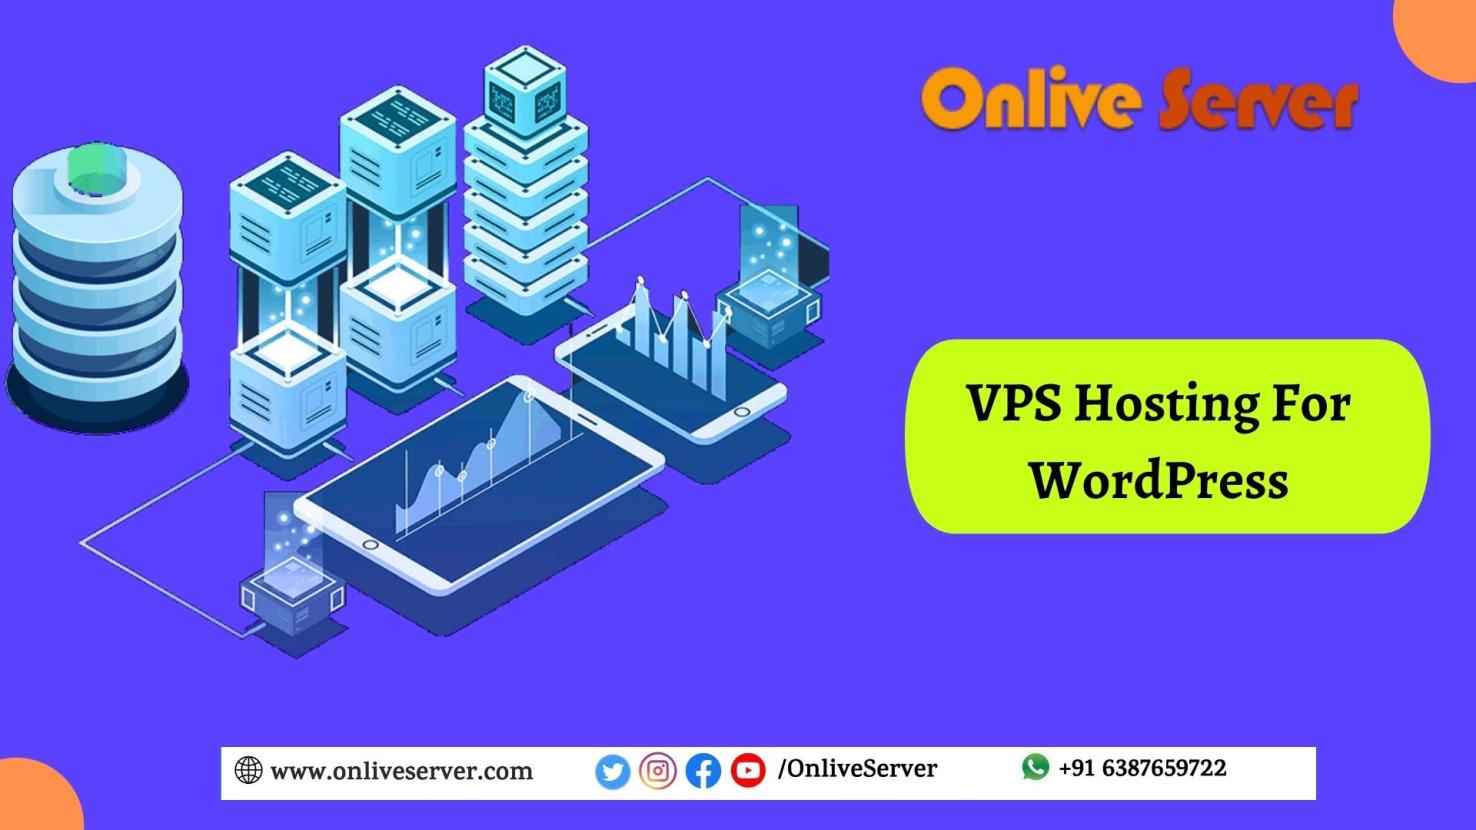 What Is VPS Hosting And How Does It Work?